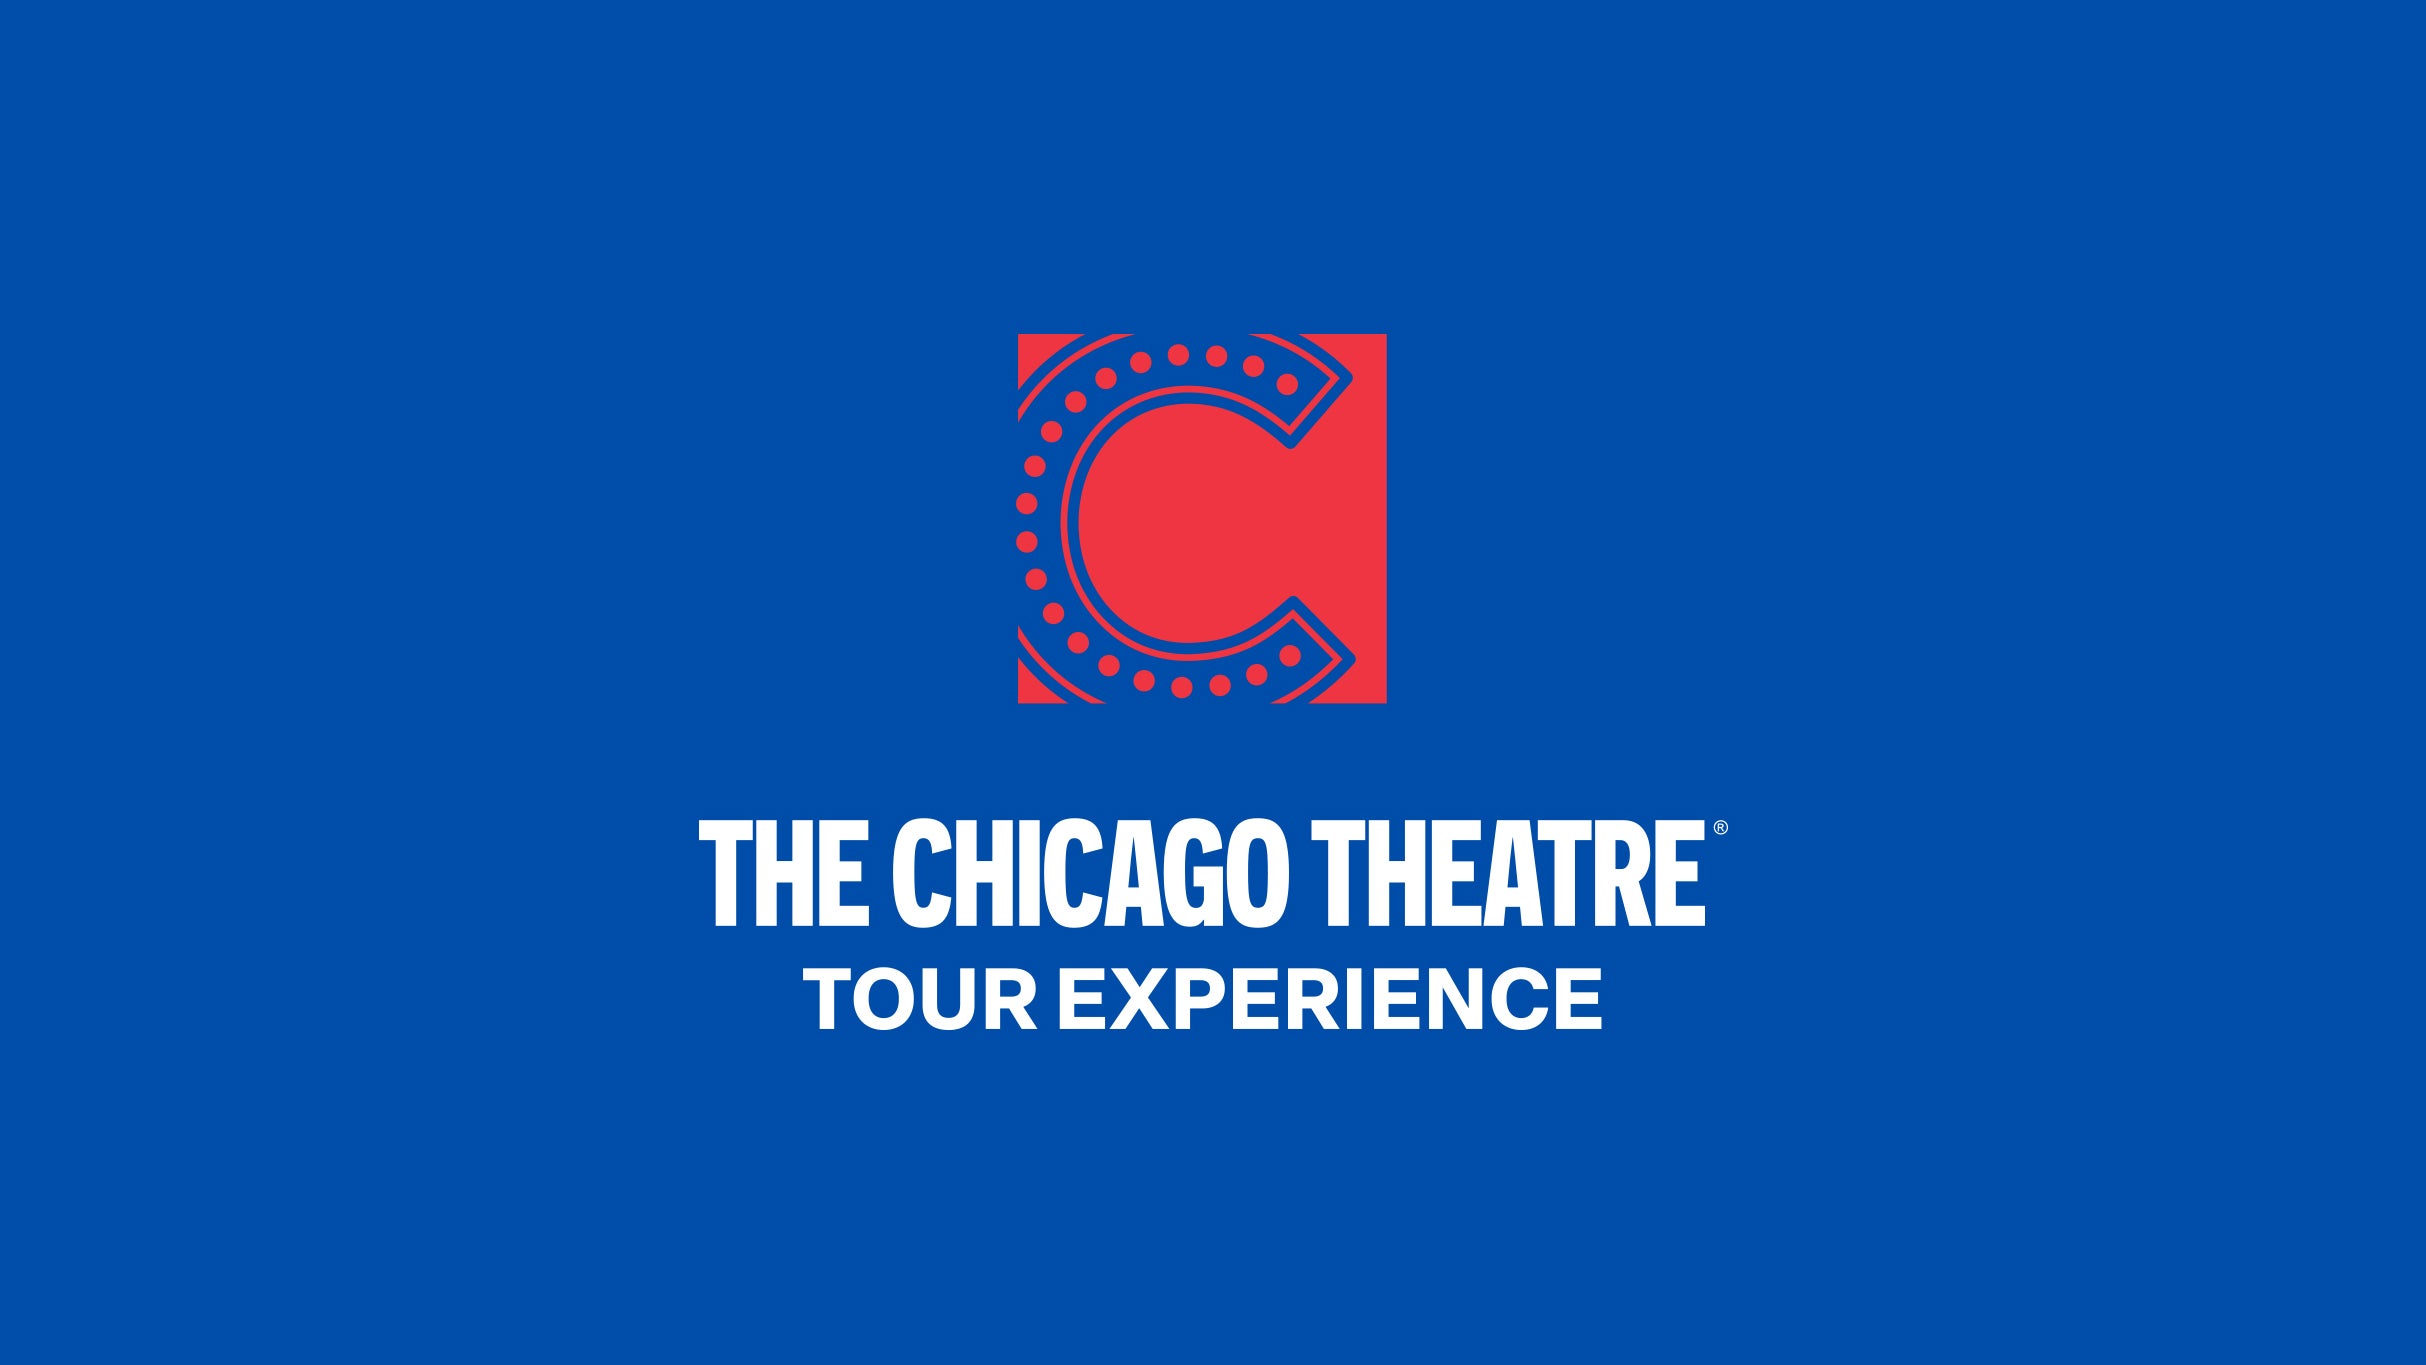 The Chicago Theatre Tour Experience